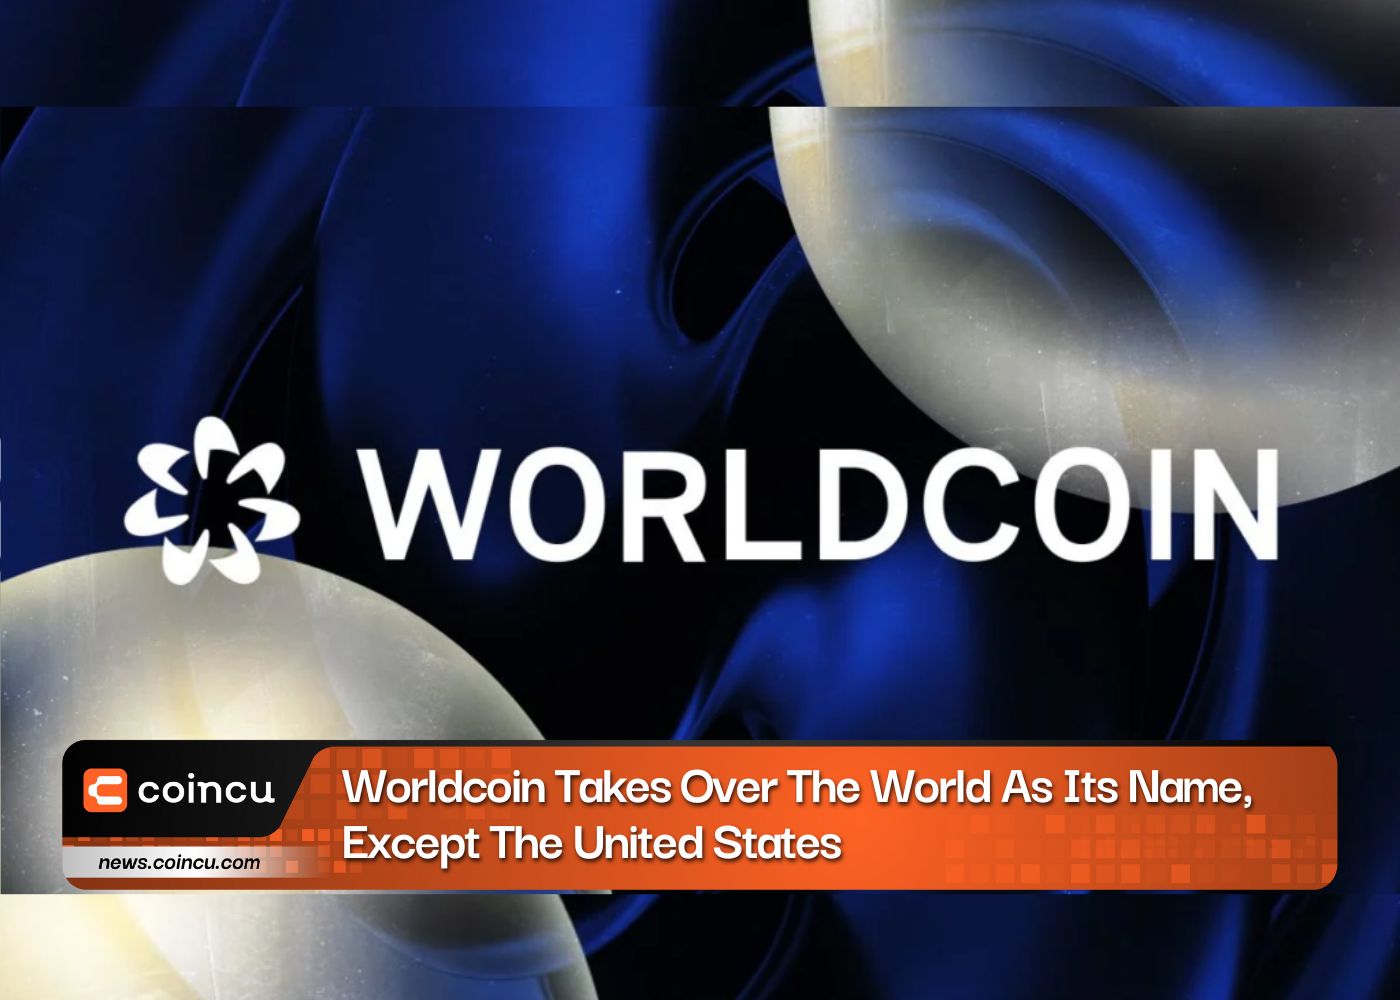 Worldcoin Takes Over The World As Its Name, Except The United States